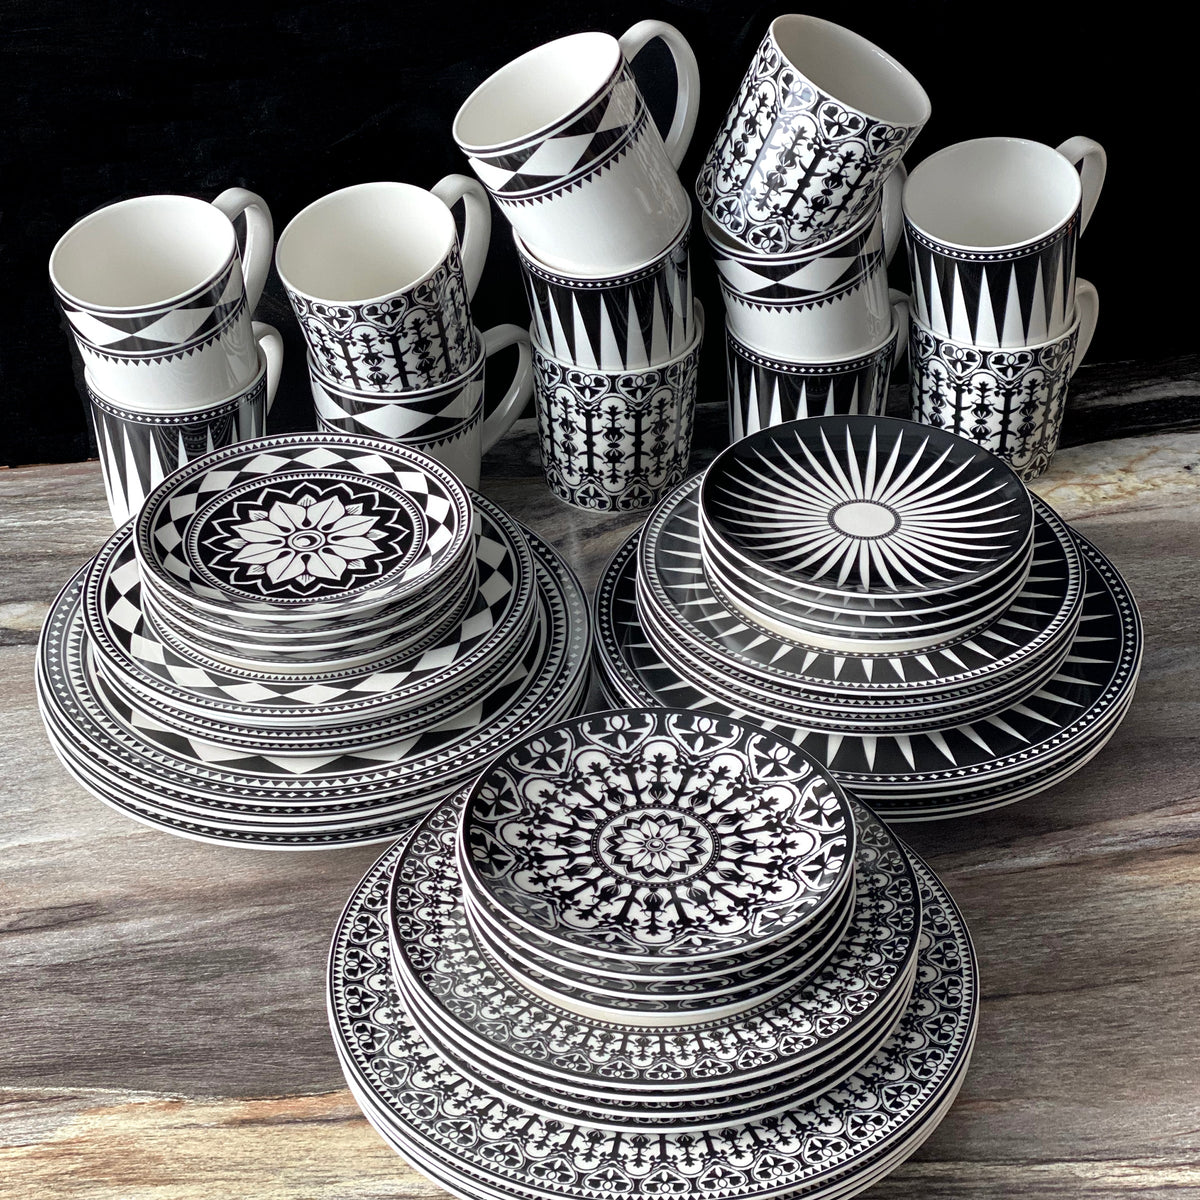 A set of Caskata Artisanal Home Casablanca Salad Plates and cups from the Geometrics Collection on a table.